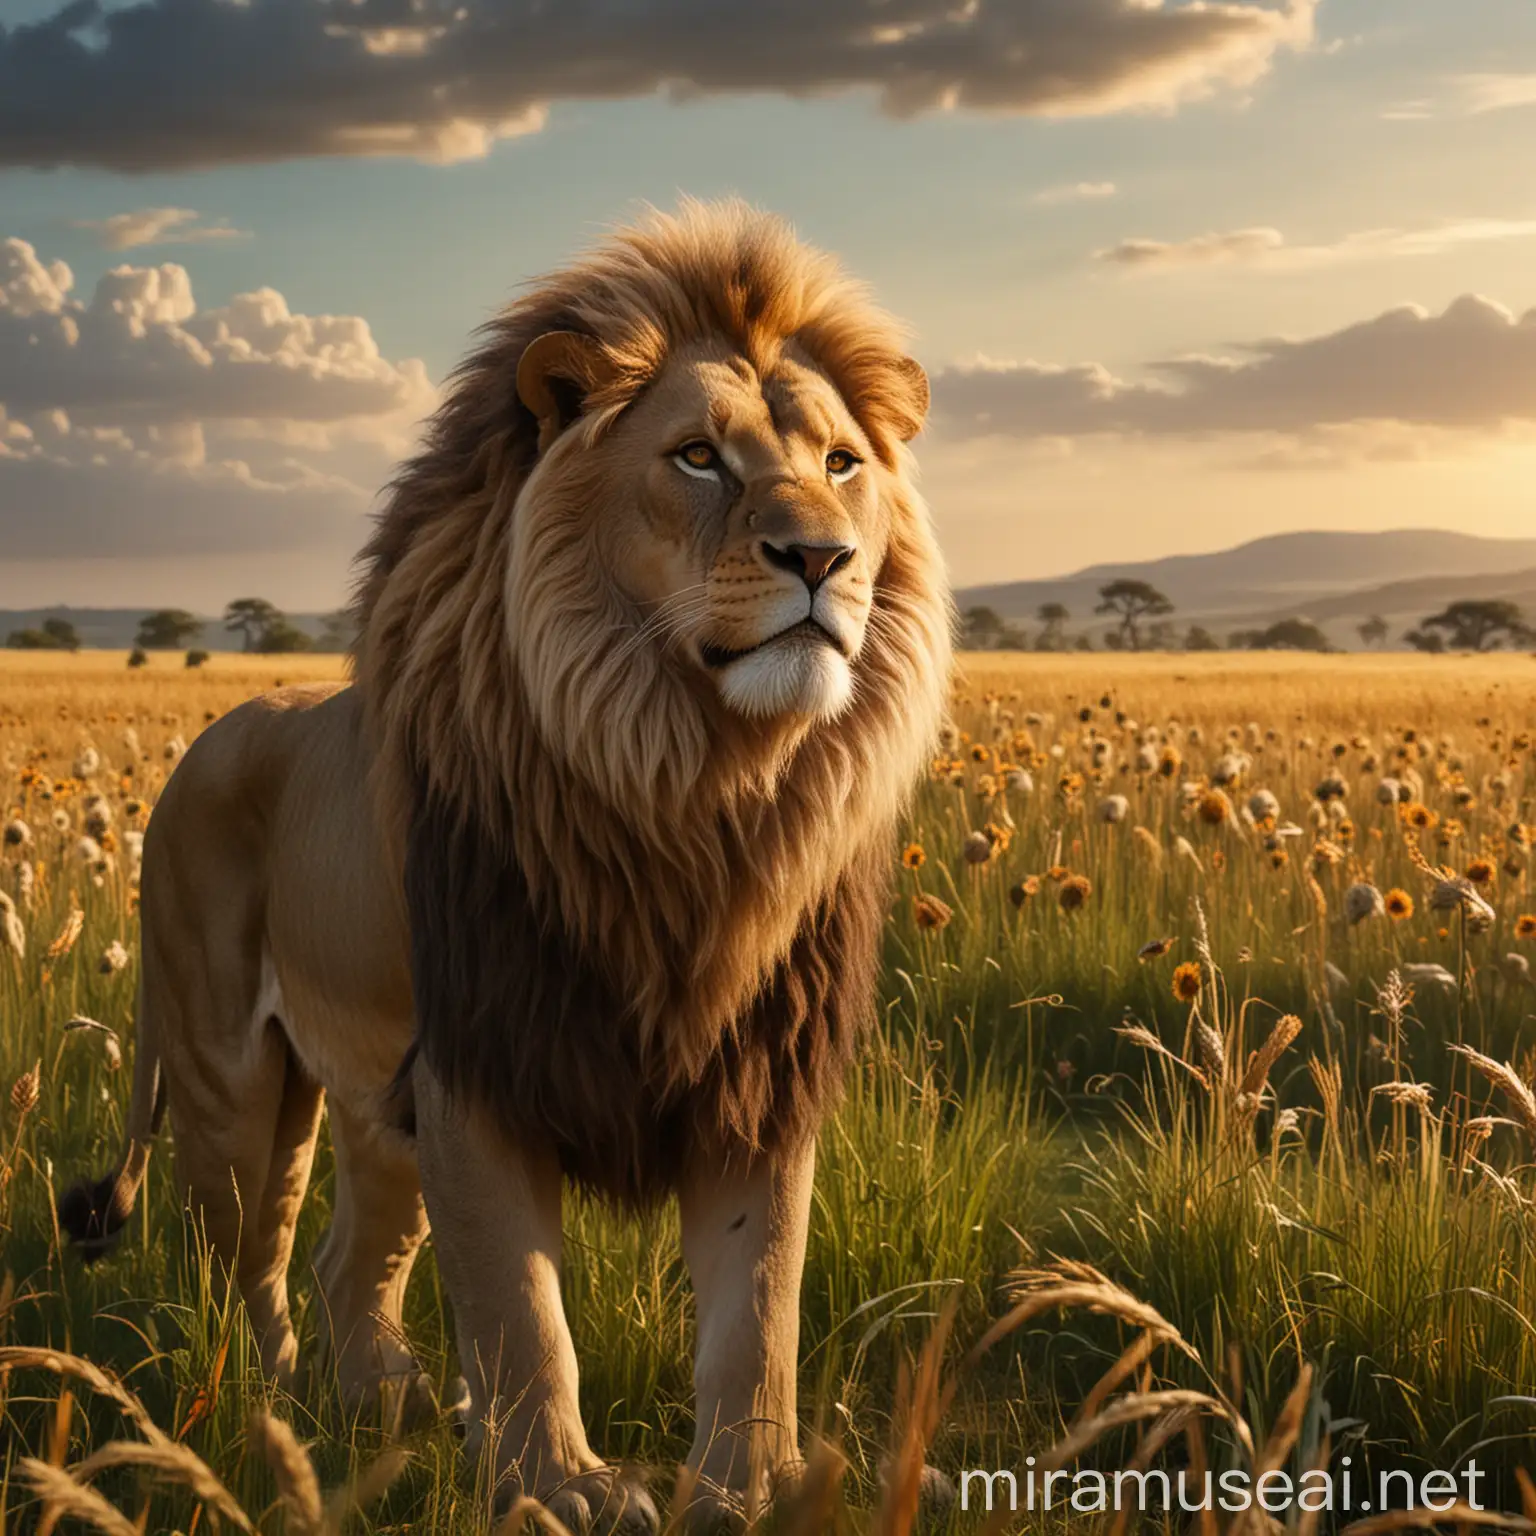 a character of a wise lion king in the fields